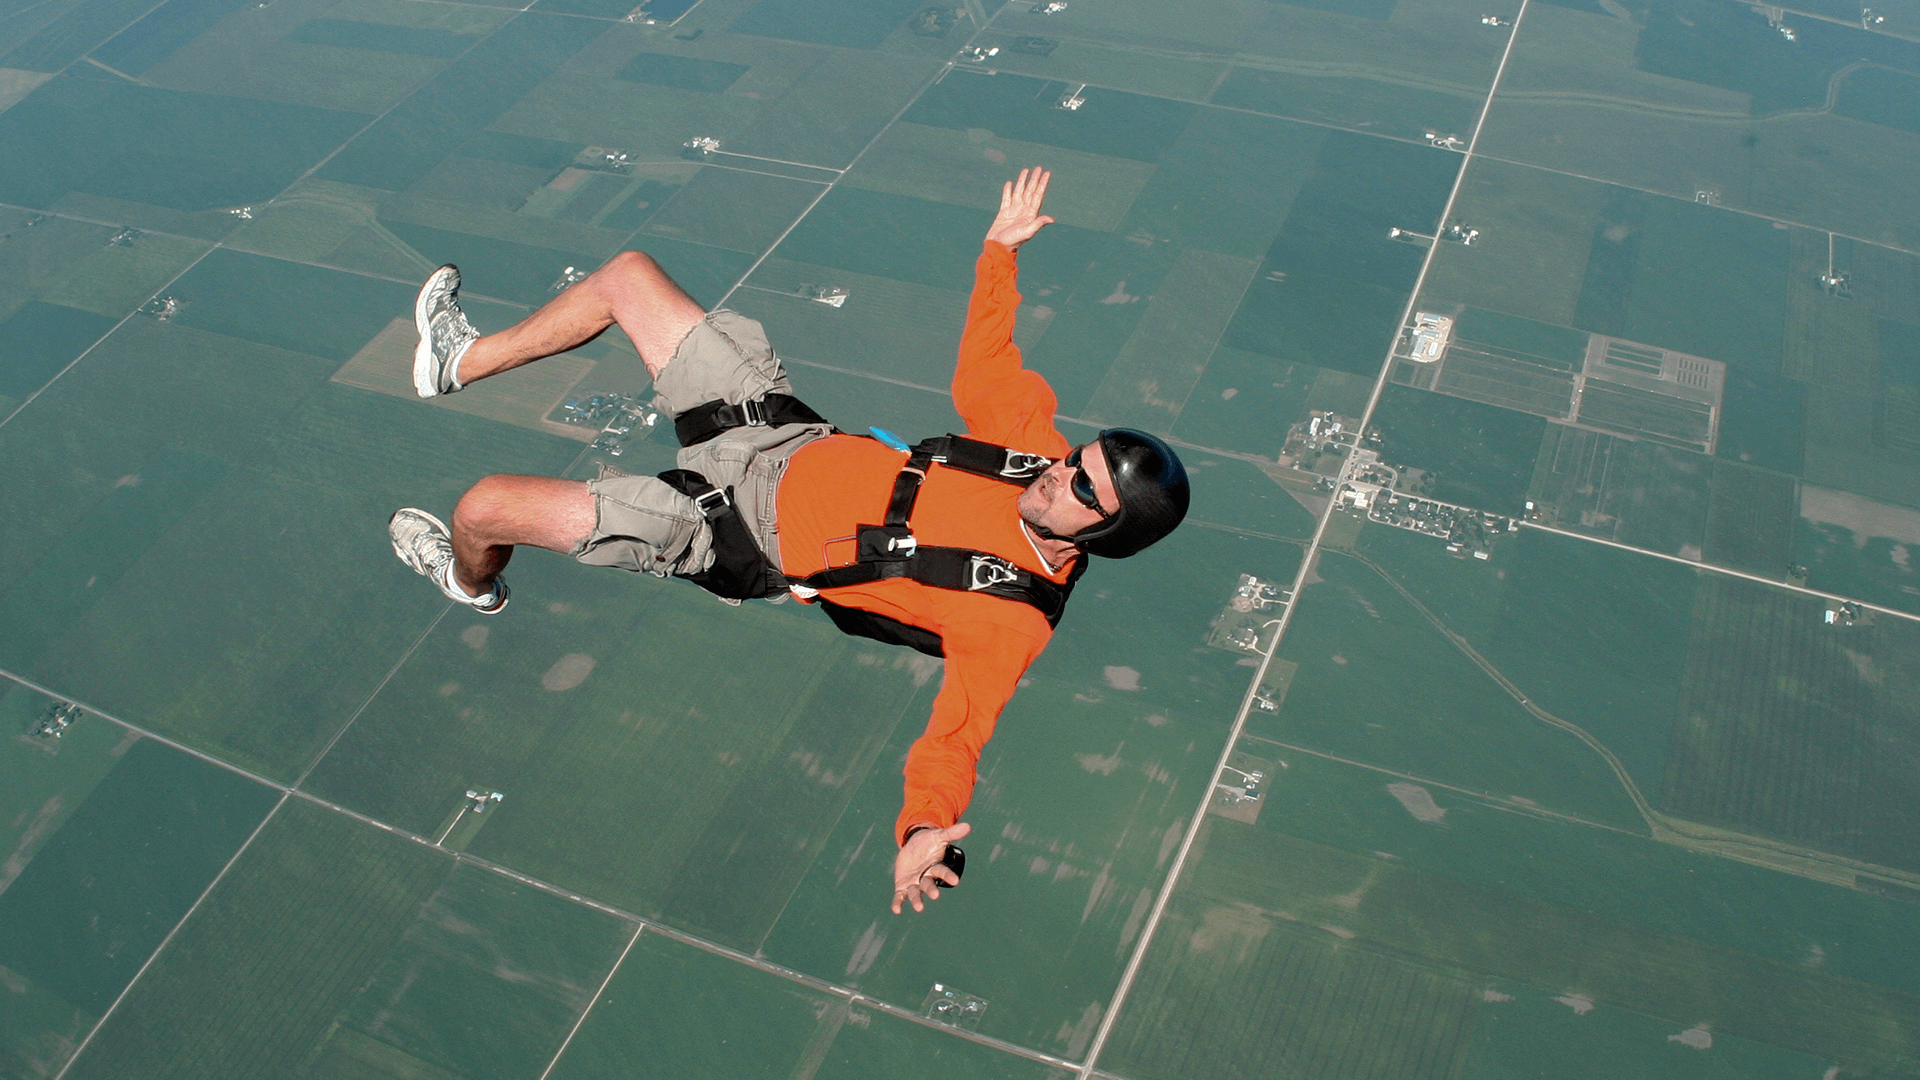 man in orange jumper skydiving over a large green expanse of fields and roads